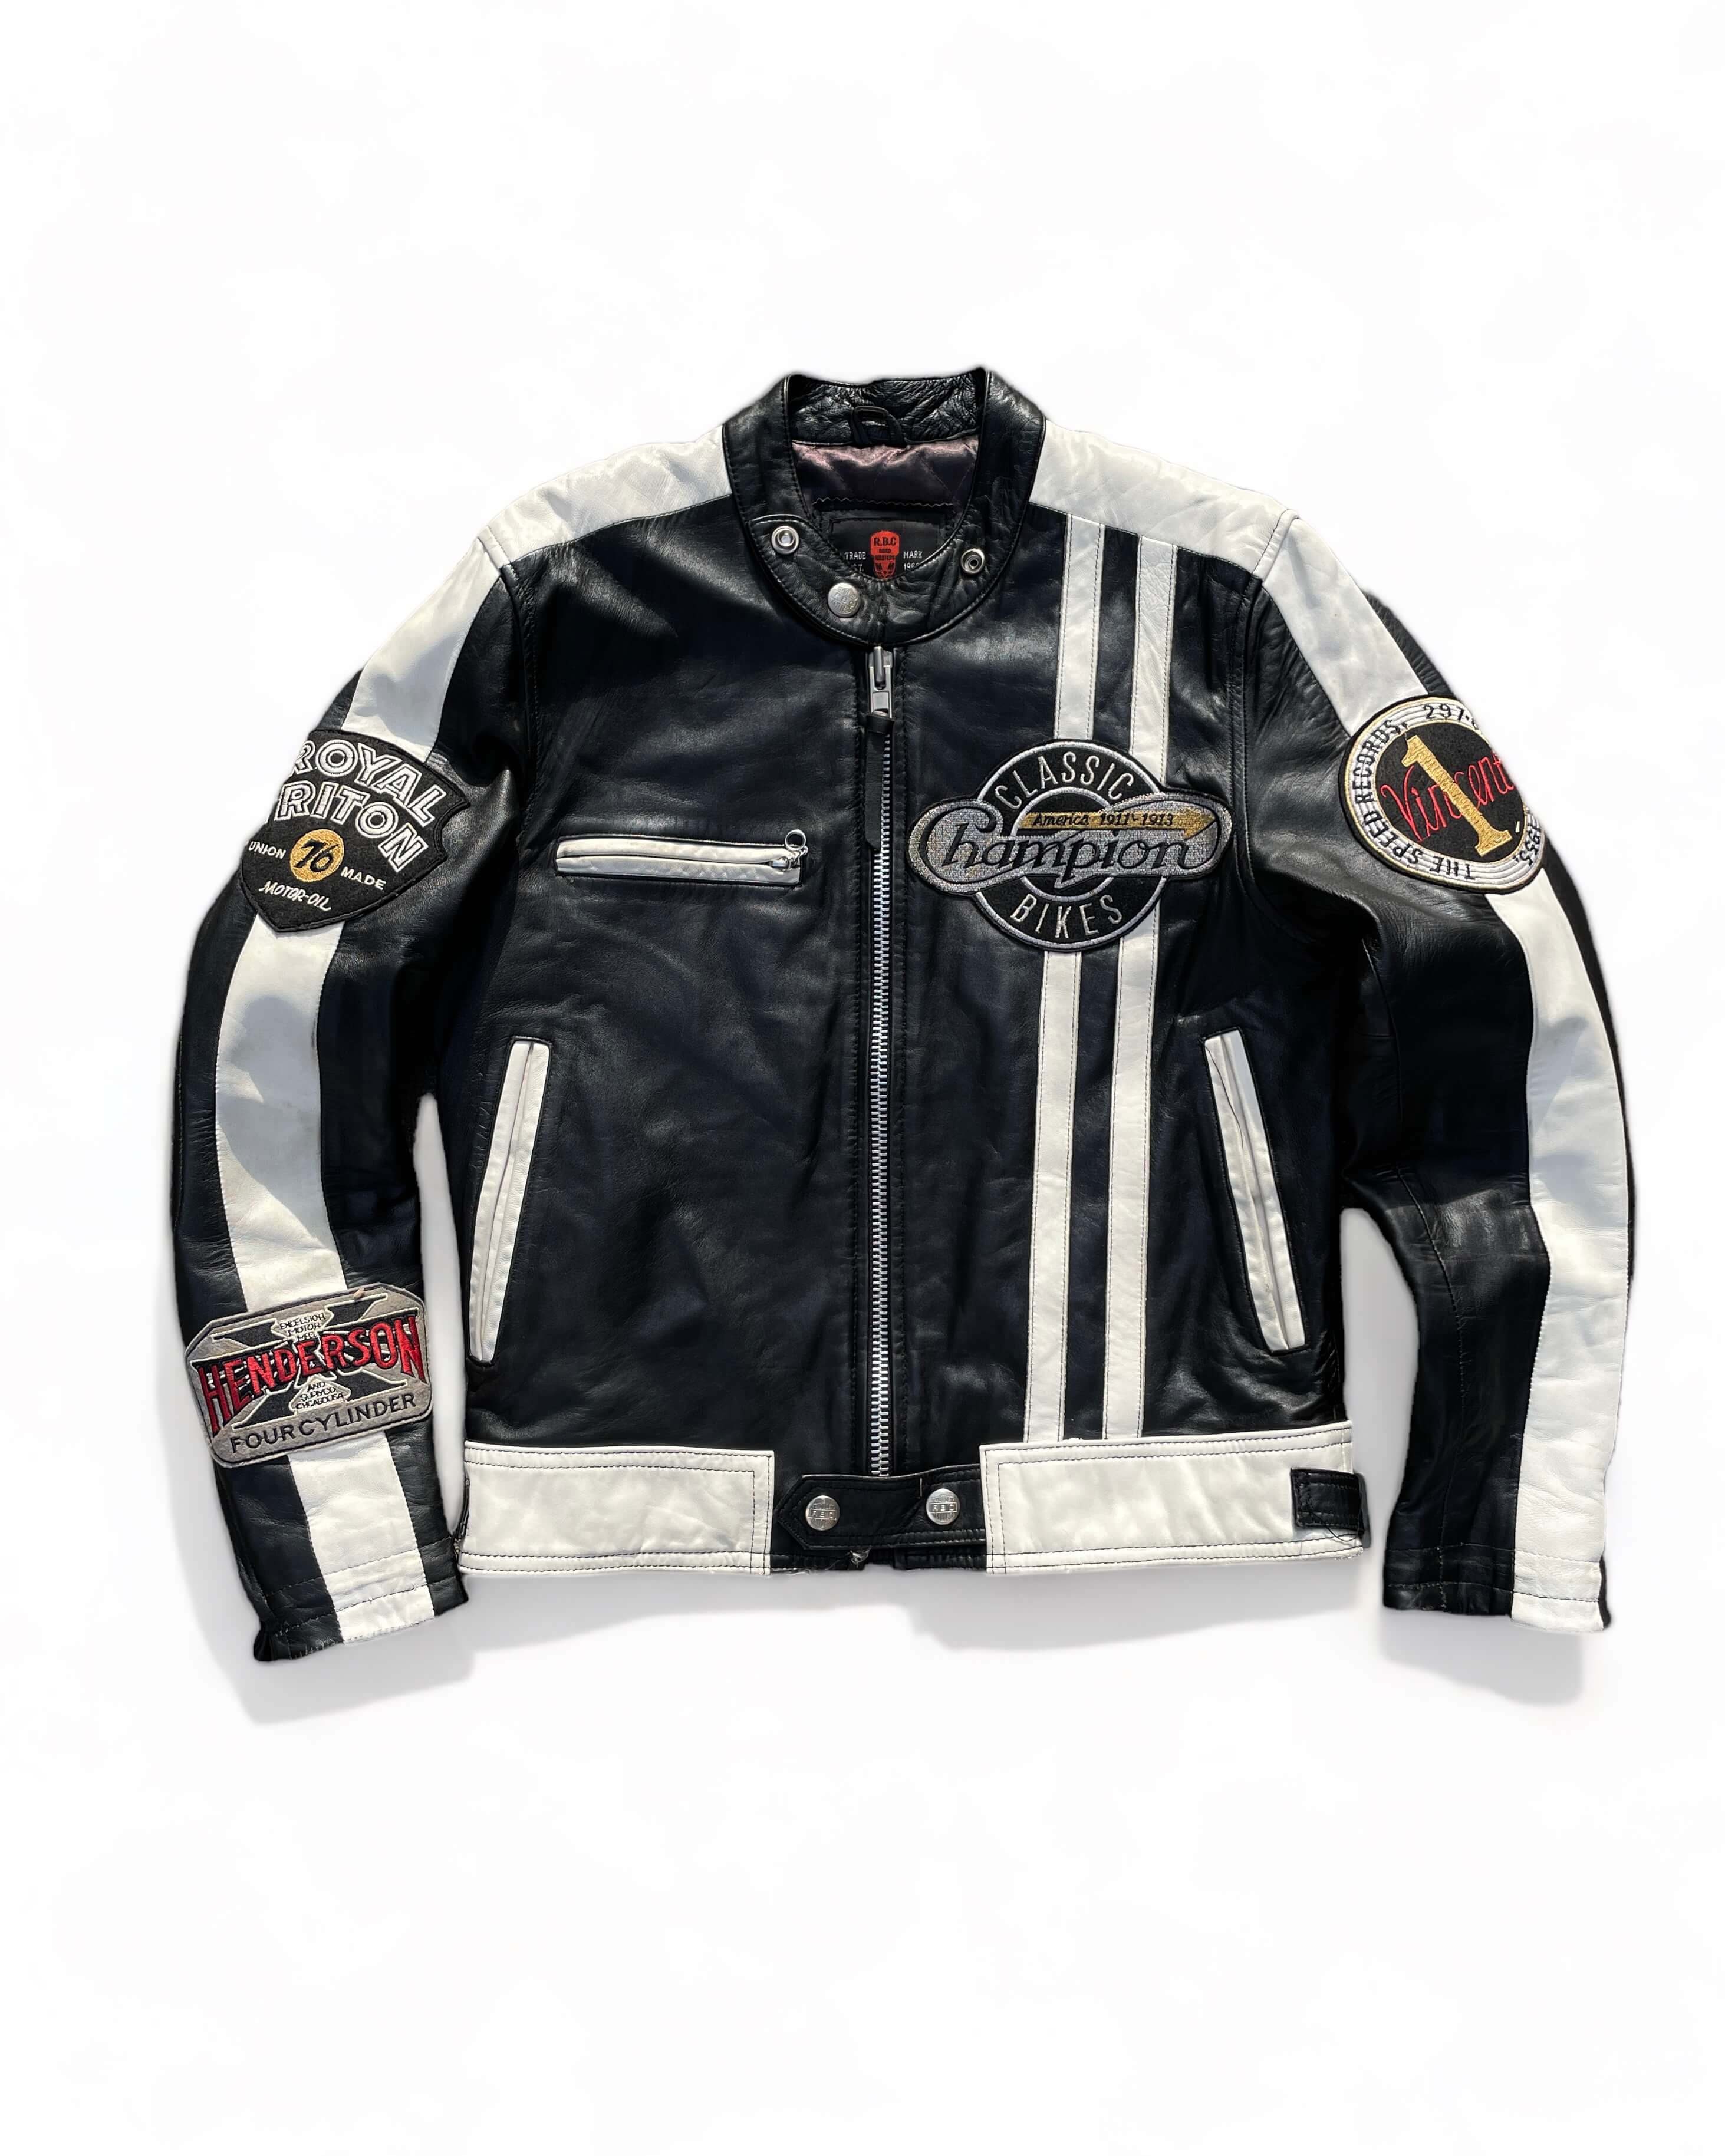 R.B.C Motorcycles Leather Cafe Racer Rider Jacket